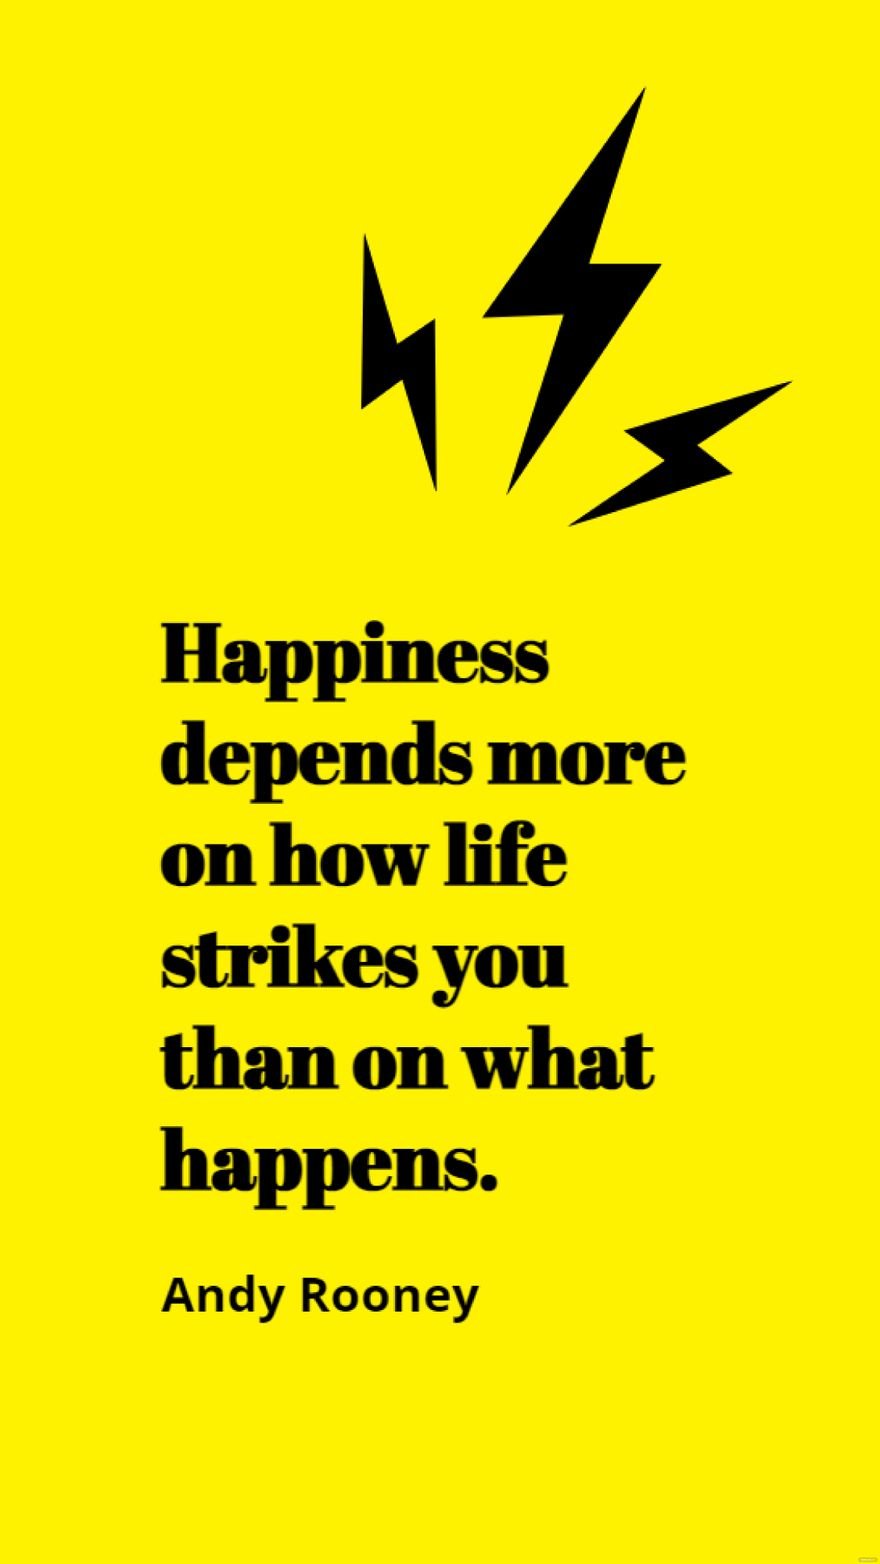  Andy Rooney - Happiness depends more on how life strikes you than on what happens.